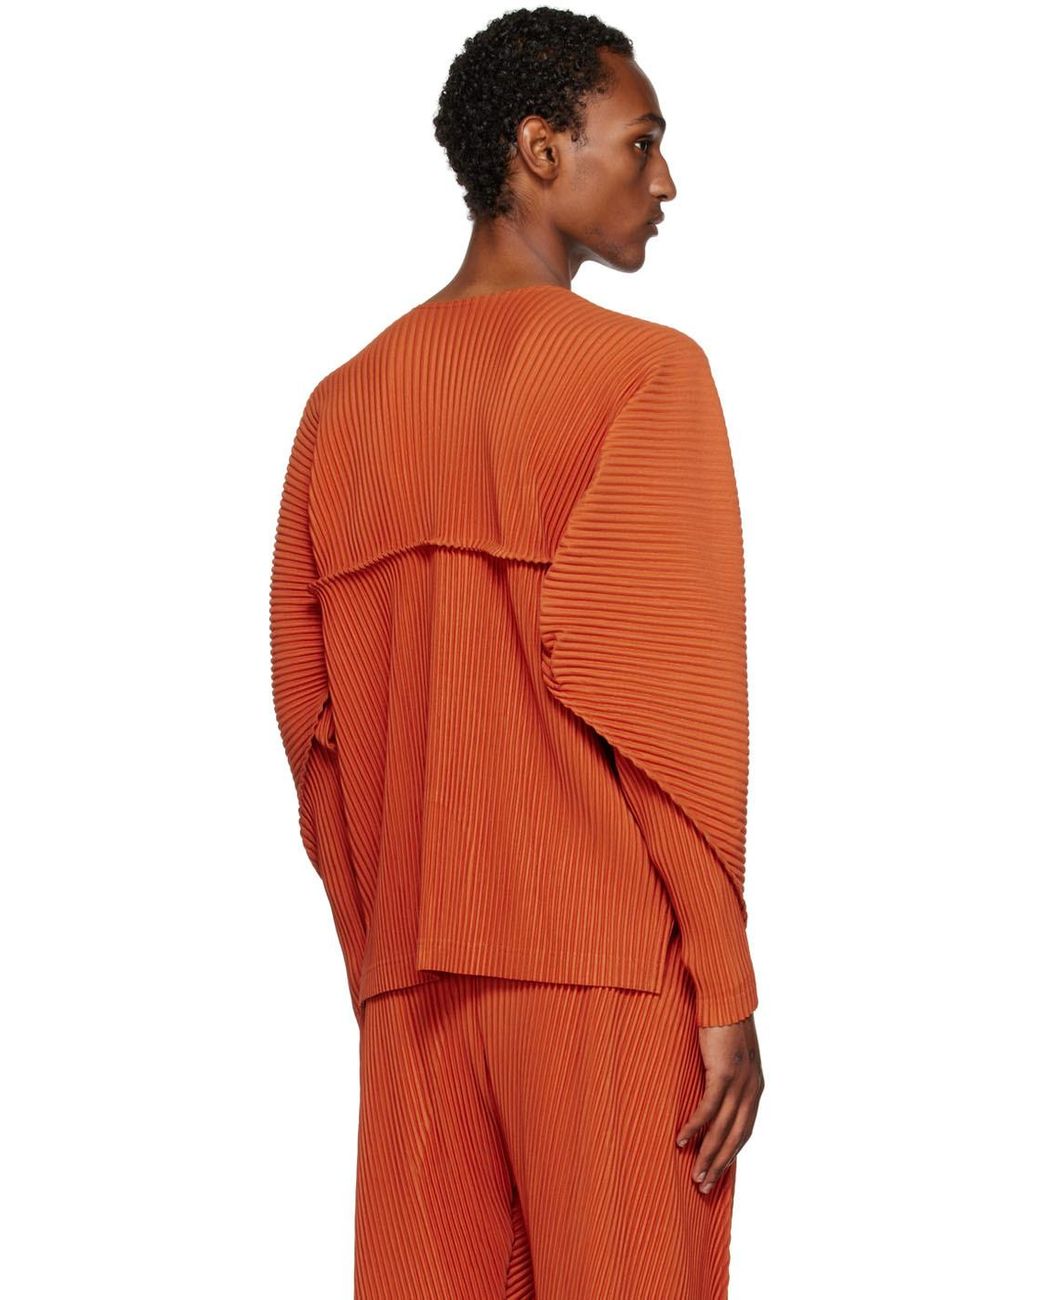 Homme Plissé Issey Miyake Arc Long Sleeve T-shirt in Orange for